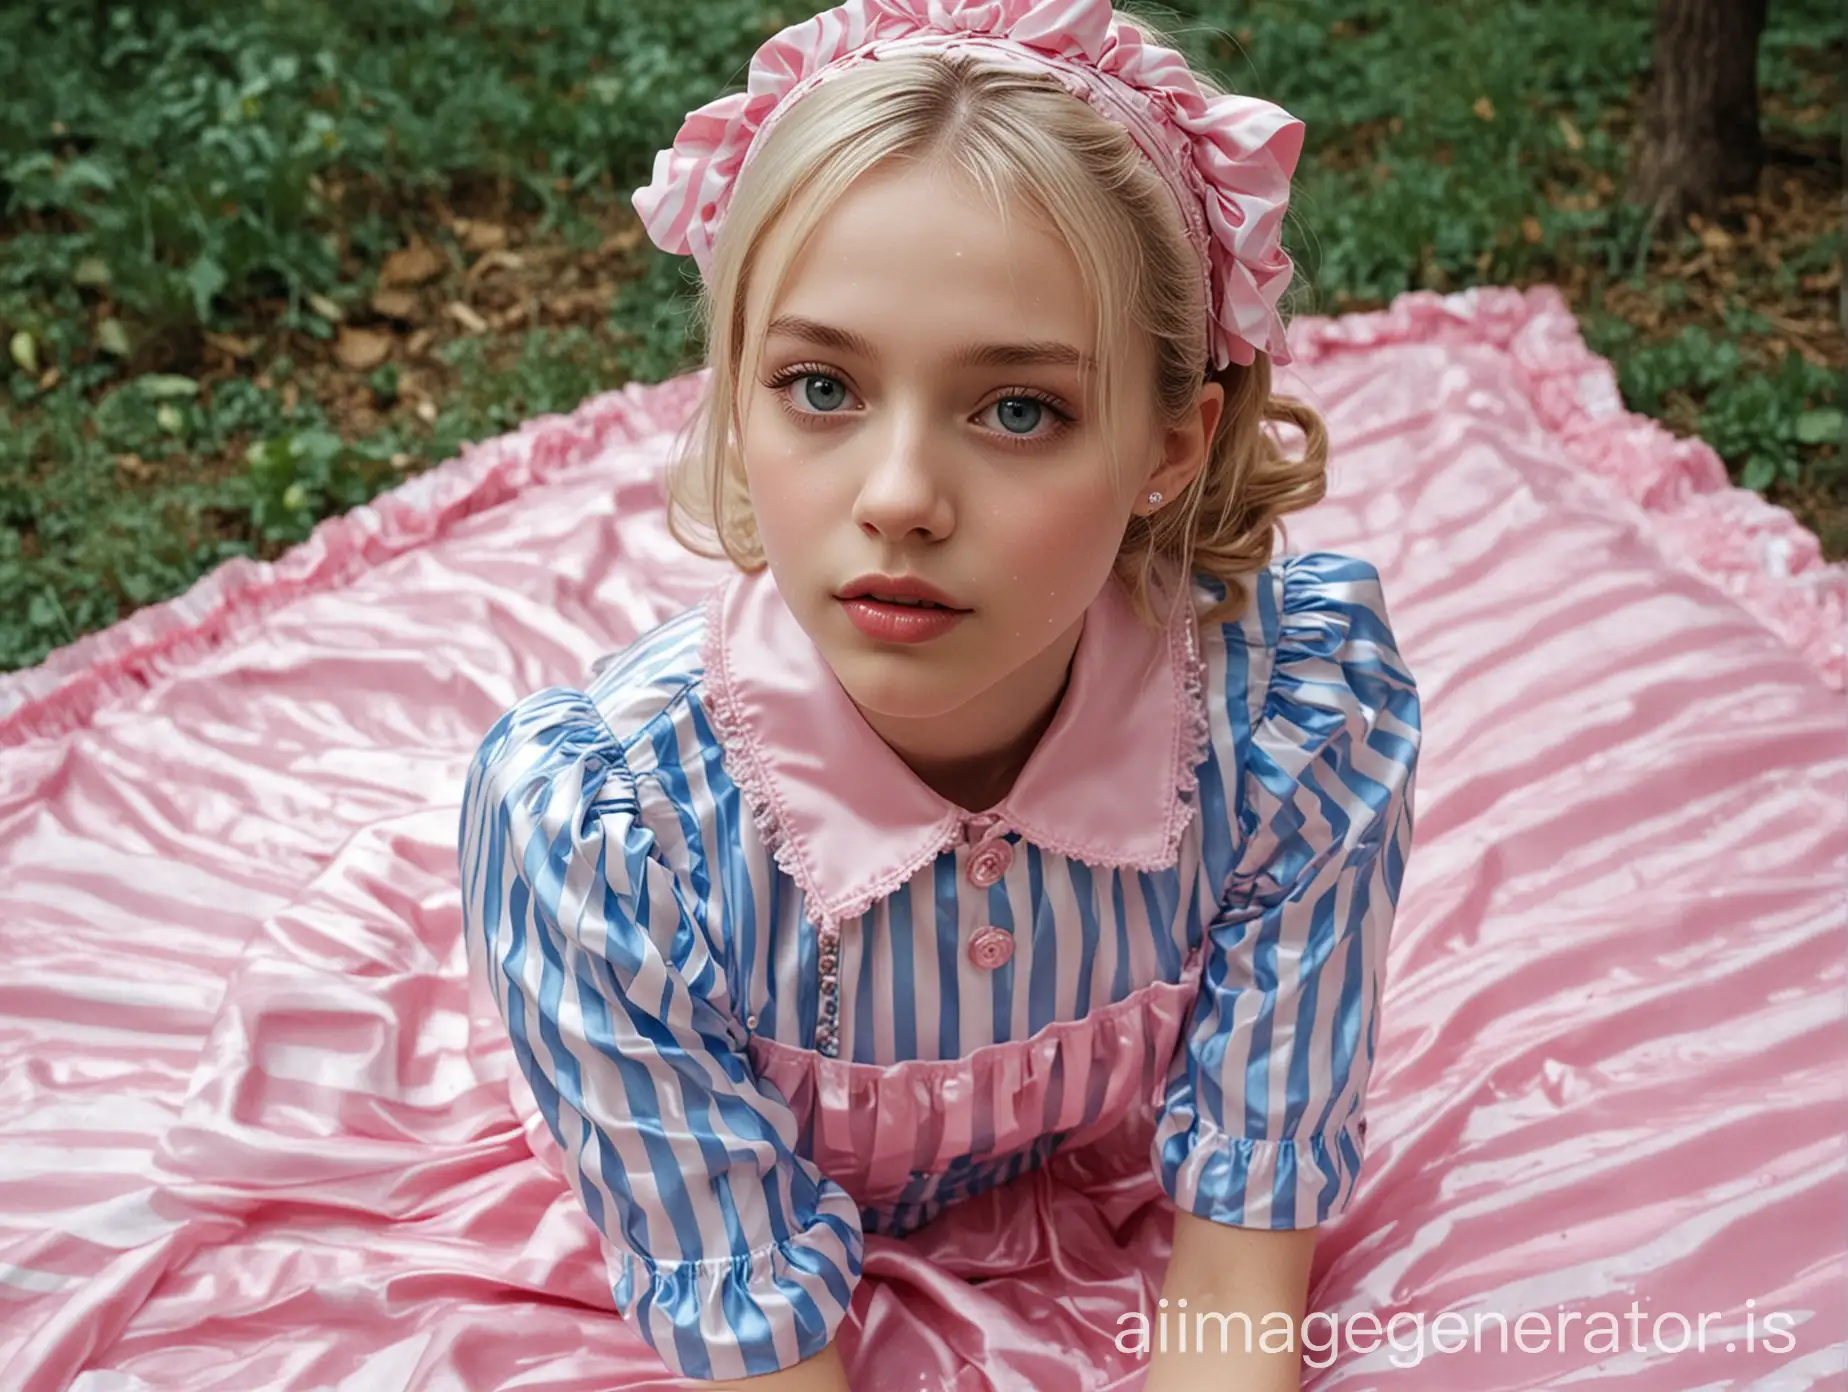 hyperrealistic image. highest quality. french girl on her tenth birthday. very skinny, very white skin. wearing a sweet lolita outfit. collared and closed very high. it is striped in blue and pink and made of the shiniest satin. over the dress she wears a shiny latex apron. the girl is lying on a satin sheet alone in the forest in a heavy summer rain. face and clothes are already wet by the rain. mouth wide open. lips very shiny by the shiniest lipgloss. she wears not any jewellery